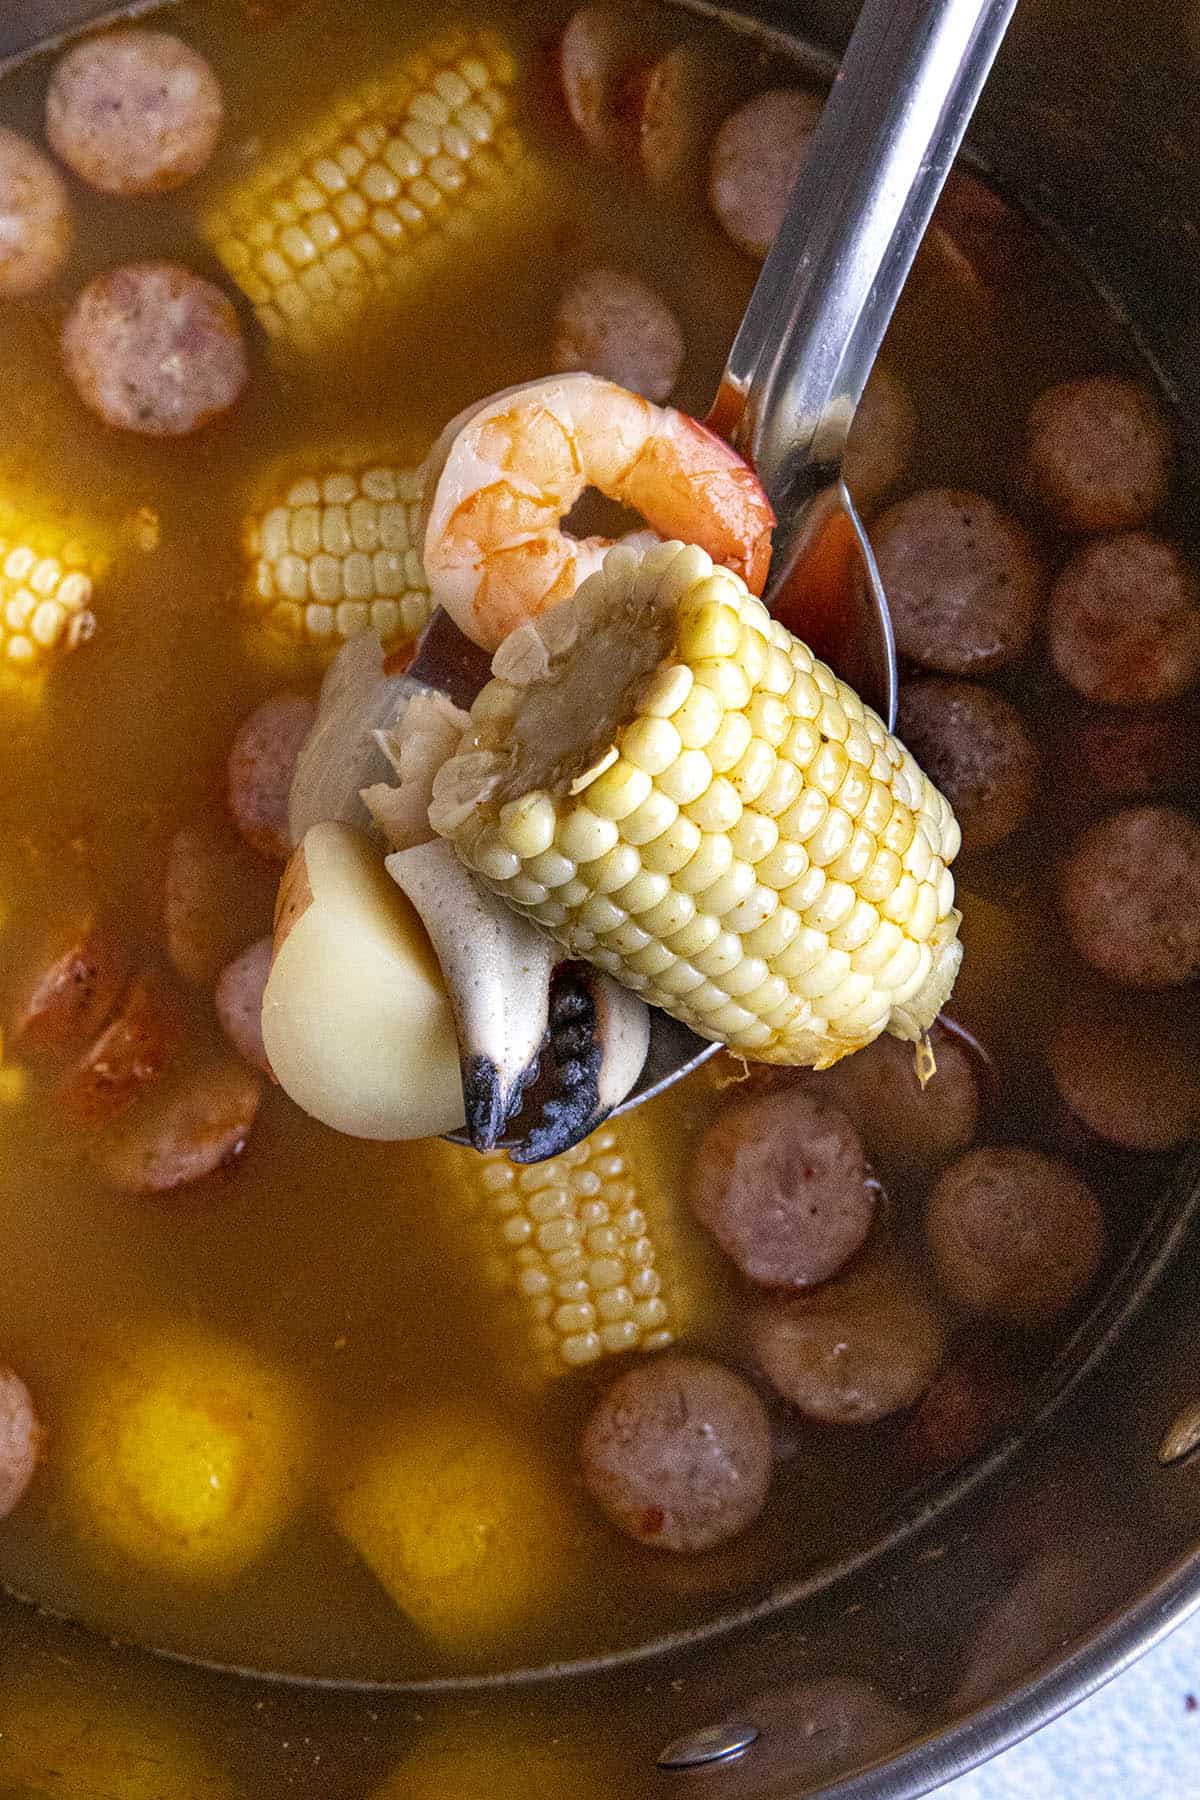 A big scoop of seafood, corn and andouille from my pot of low country boil